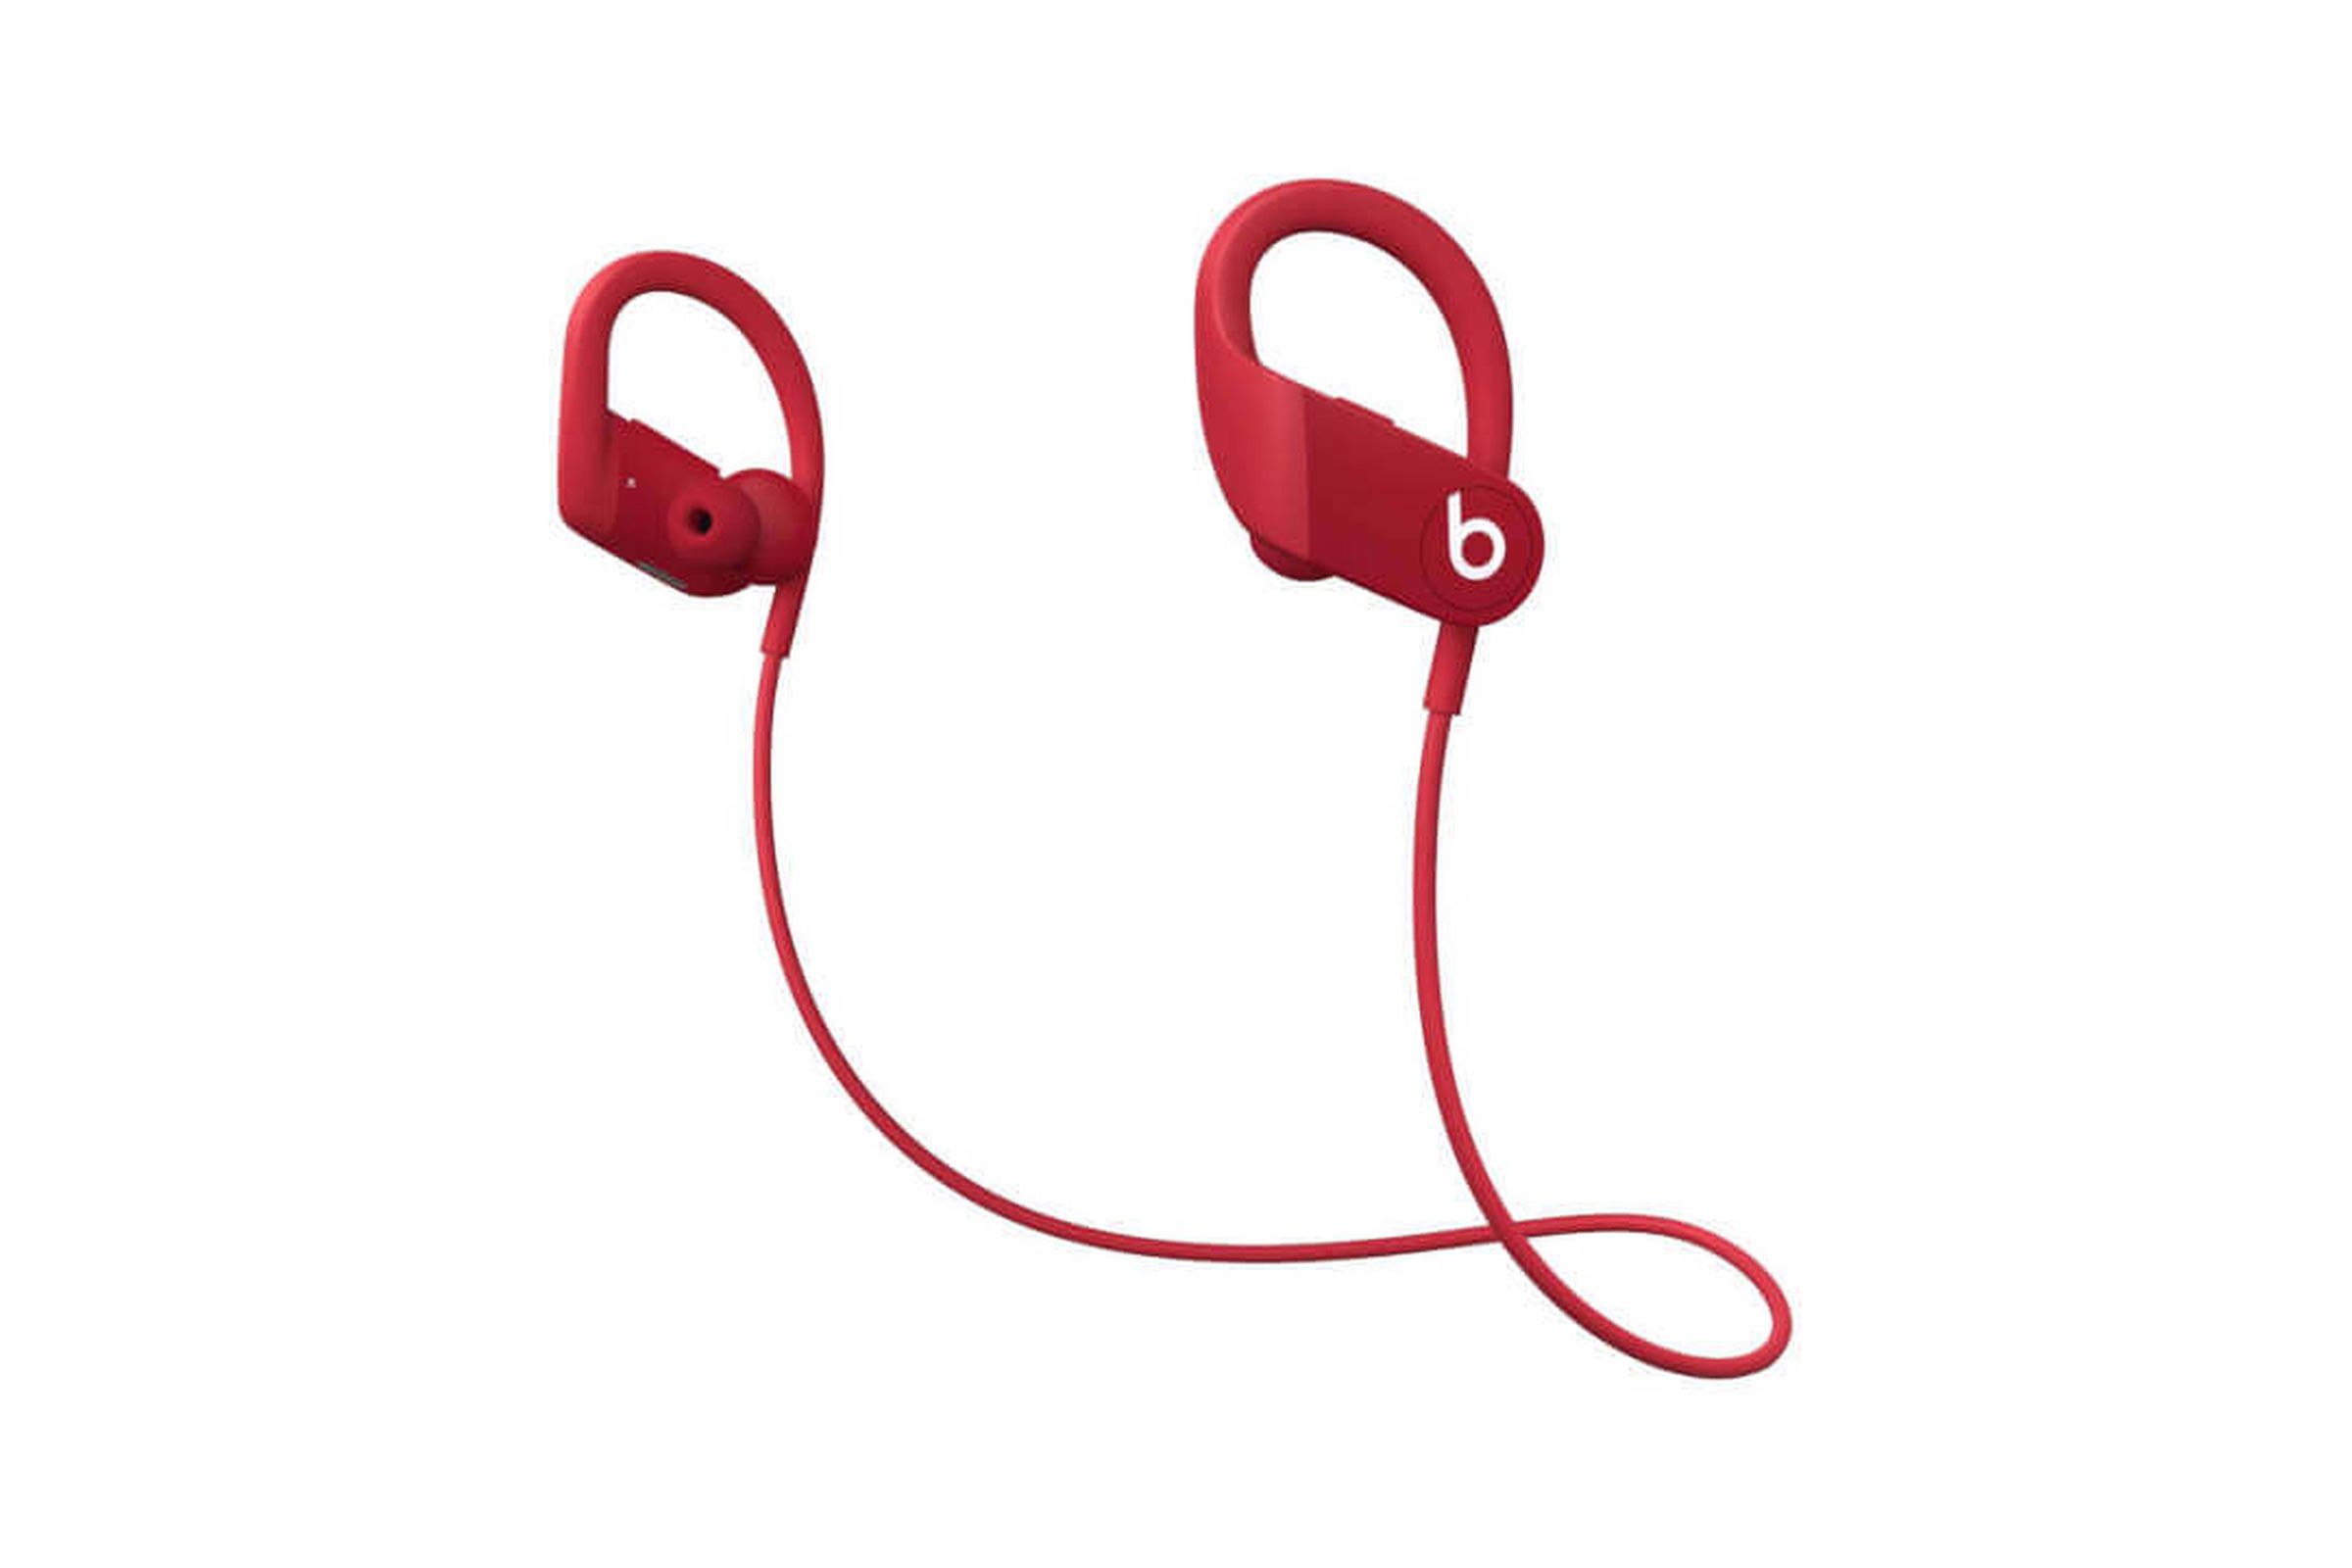 The Powerbeats 4 feature a new design with their cable coming down from the rear of the earbuds.